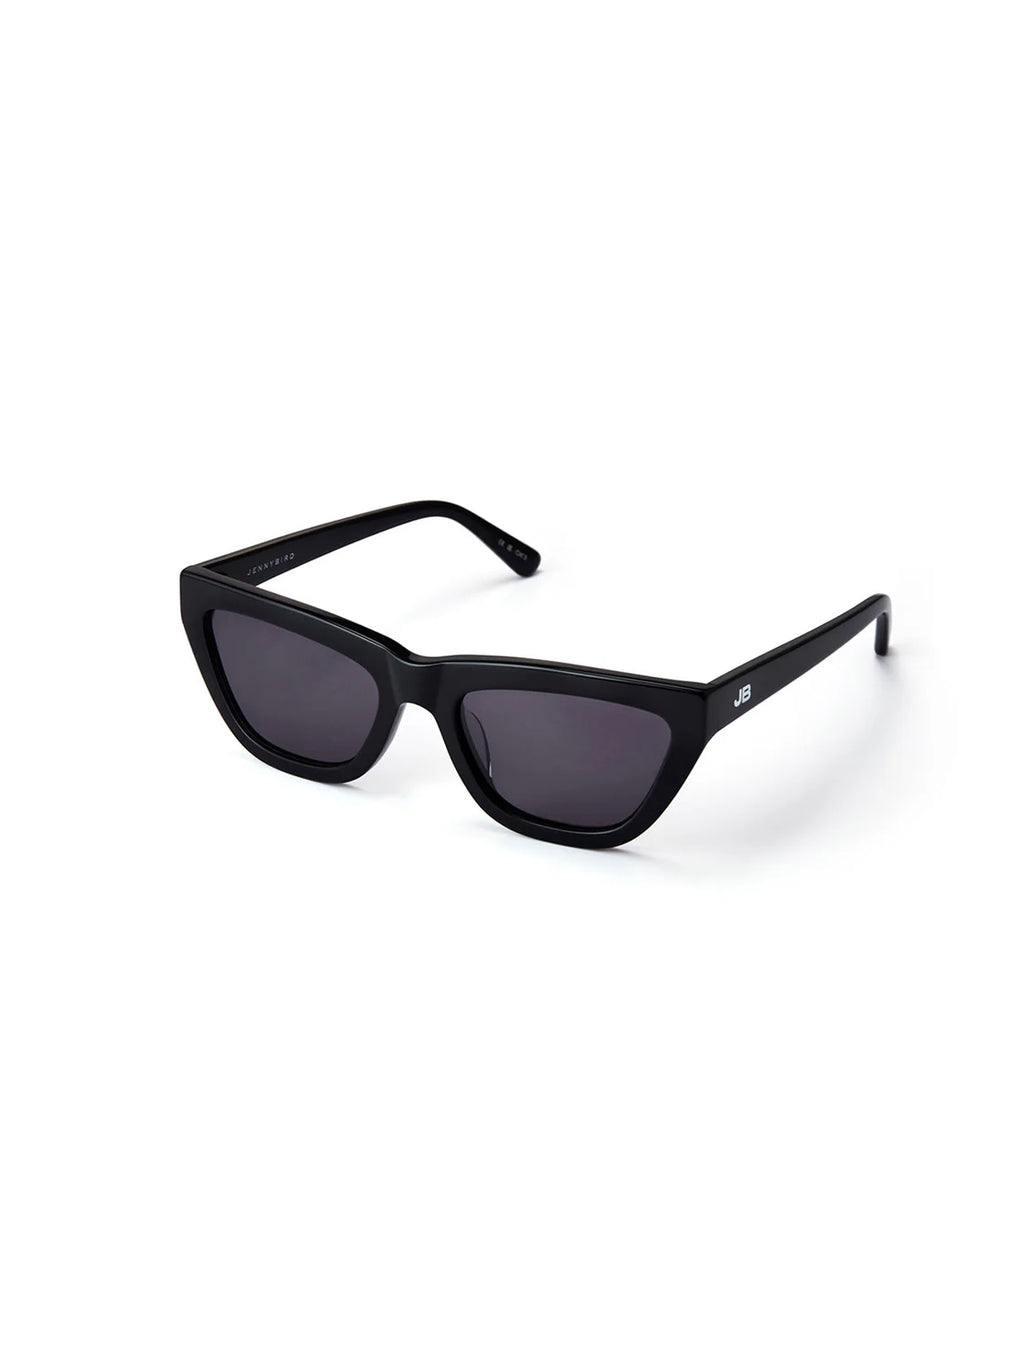 The Cateye in Black with Grey Lens